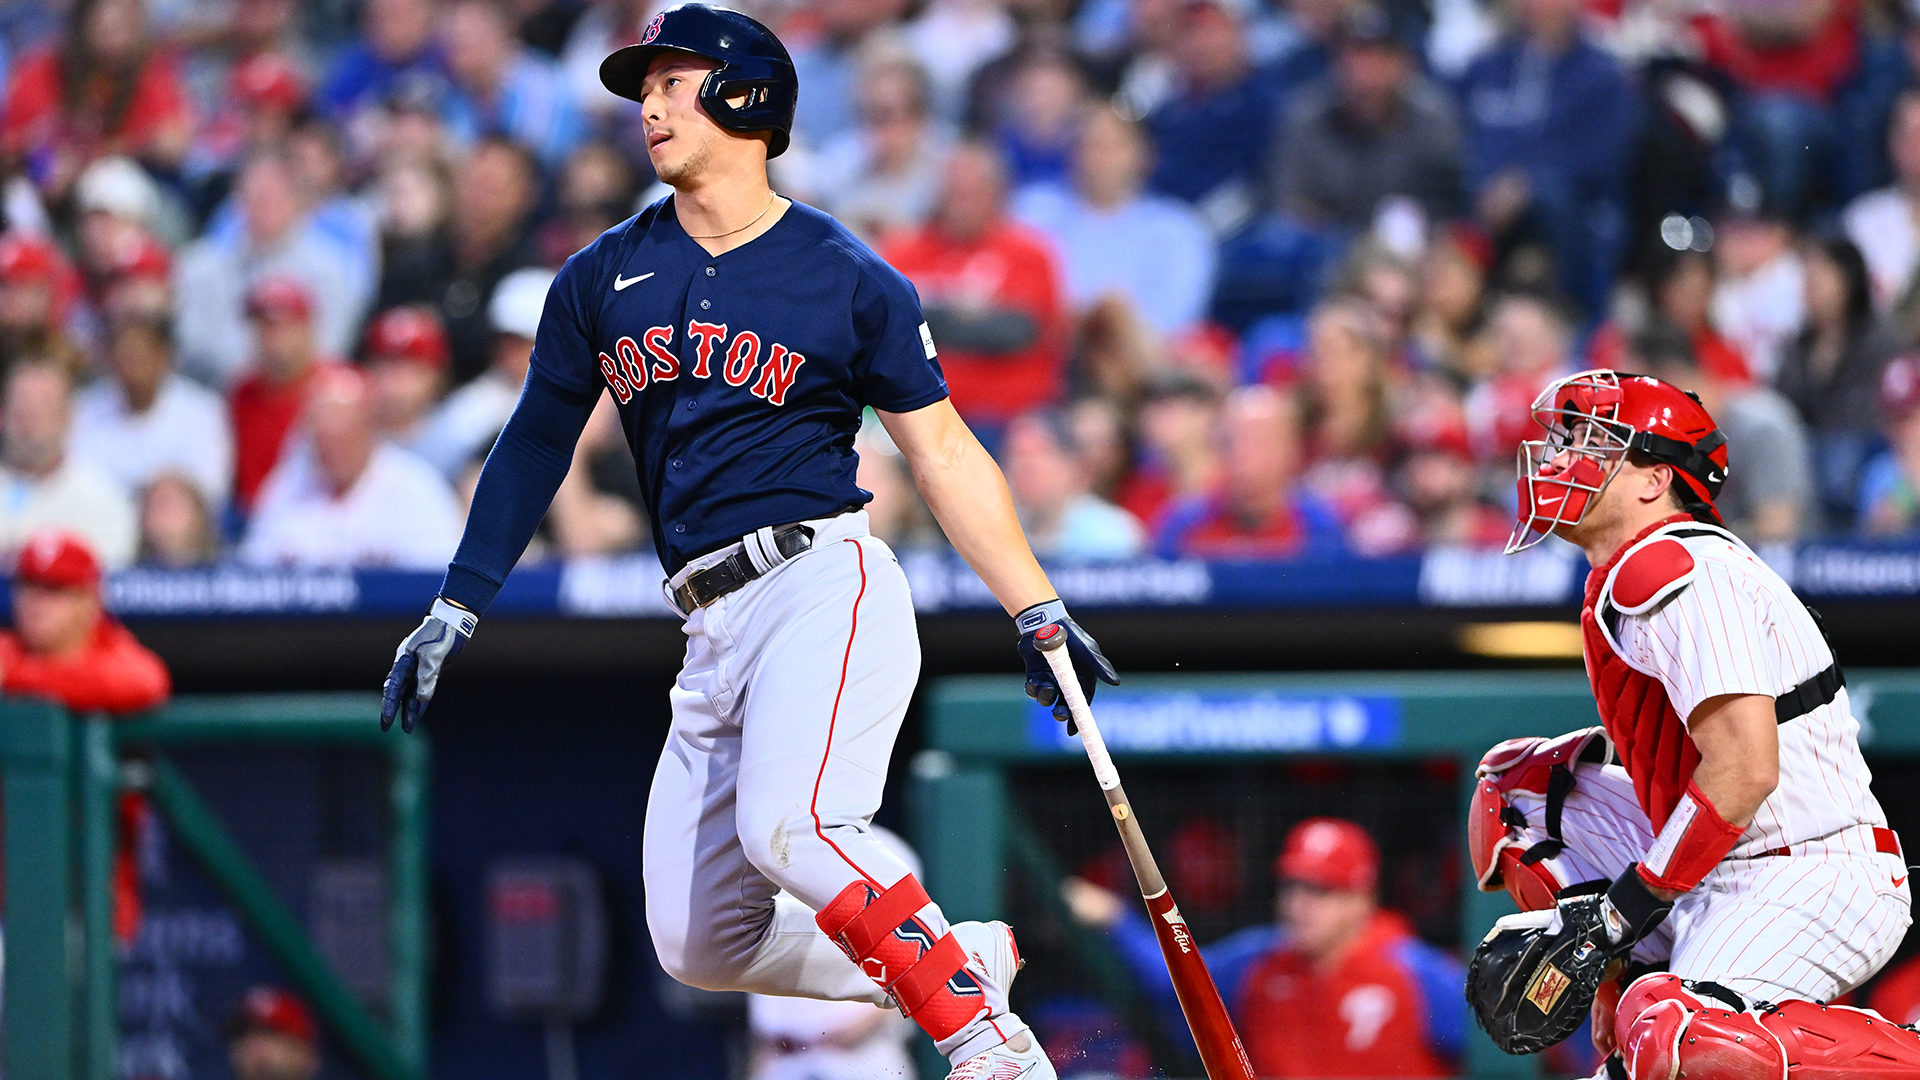 Watch: Rob Refsnyder Does Damage In Leadoff Spot For Red Sox